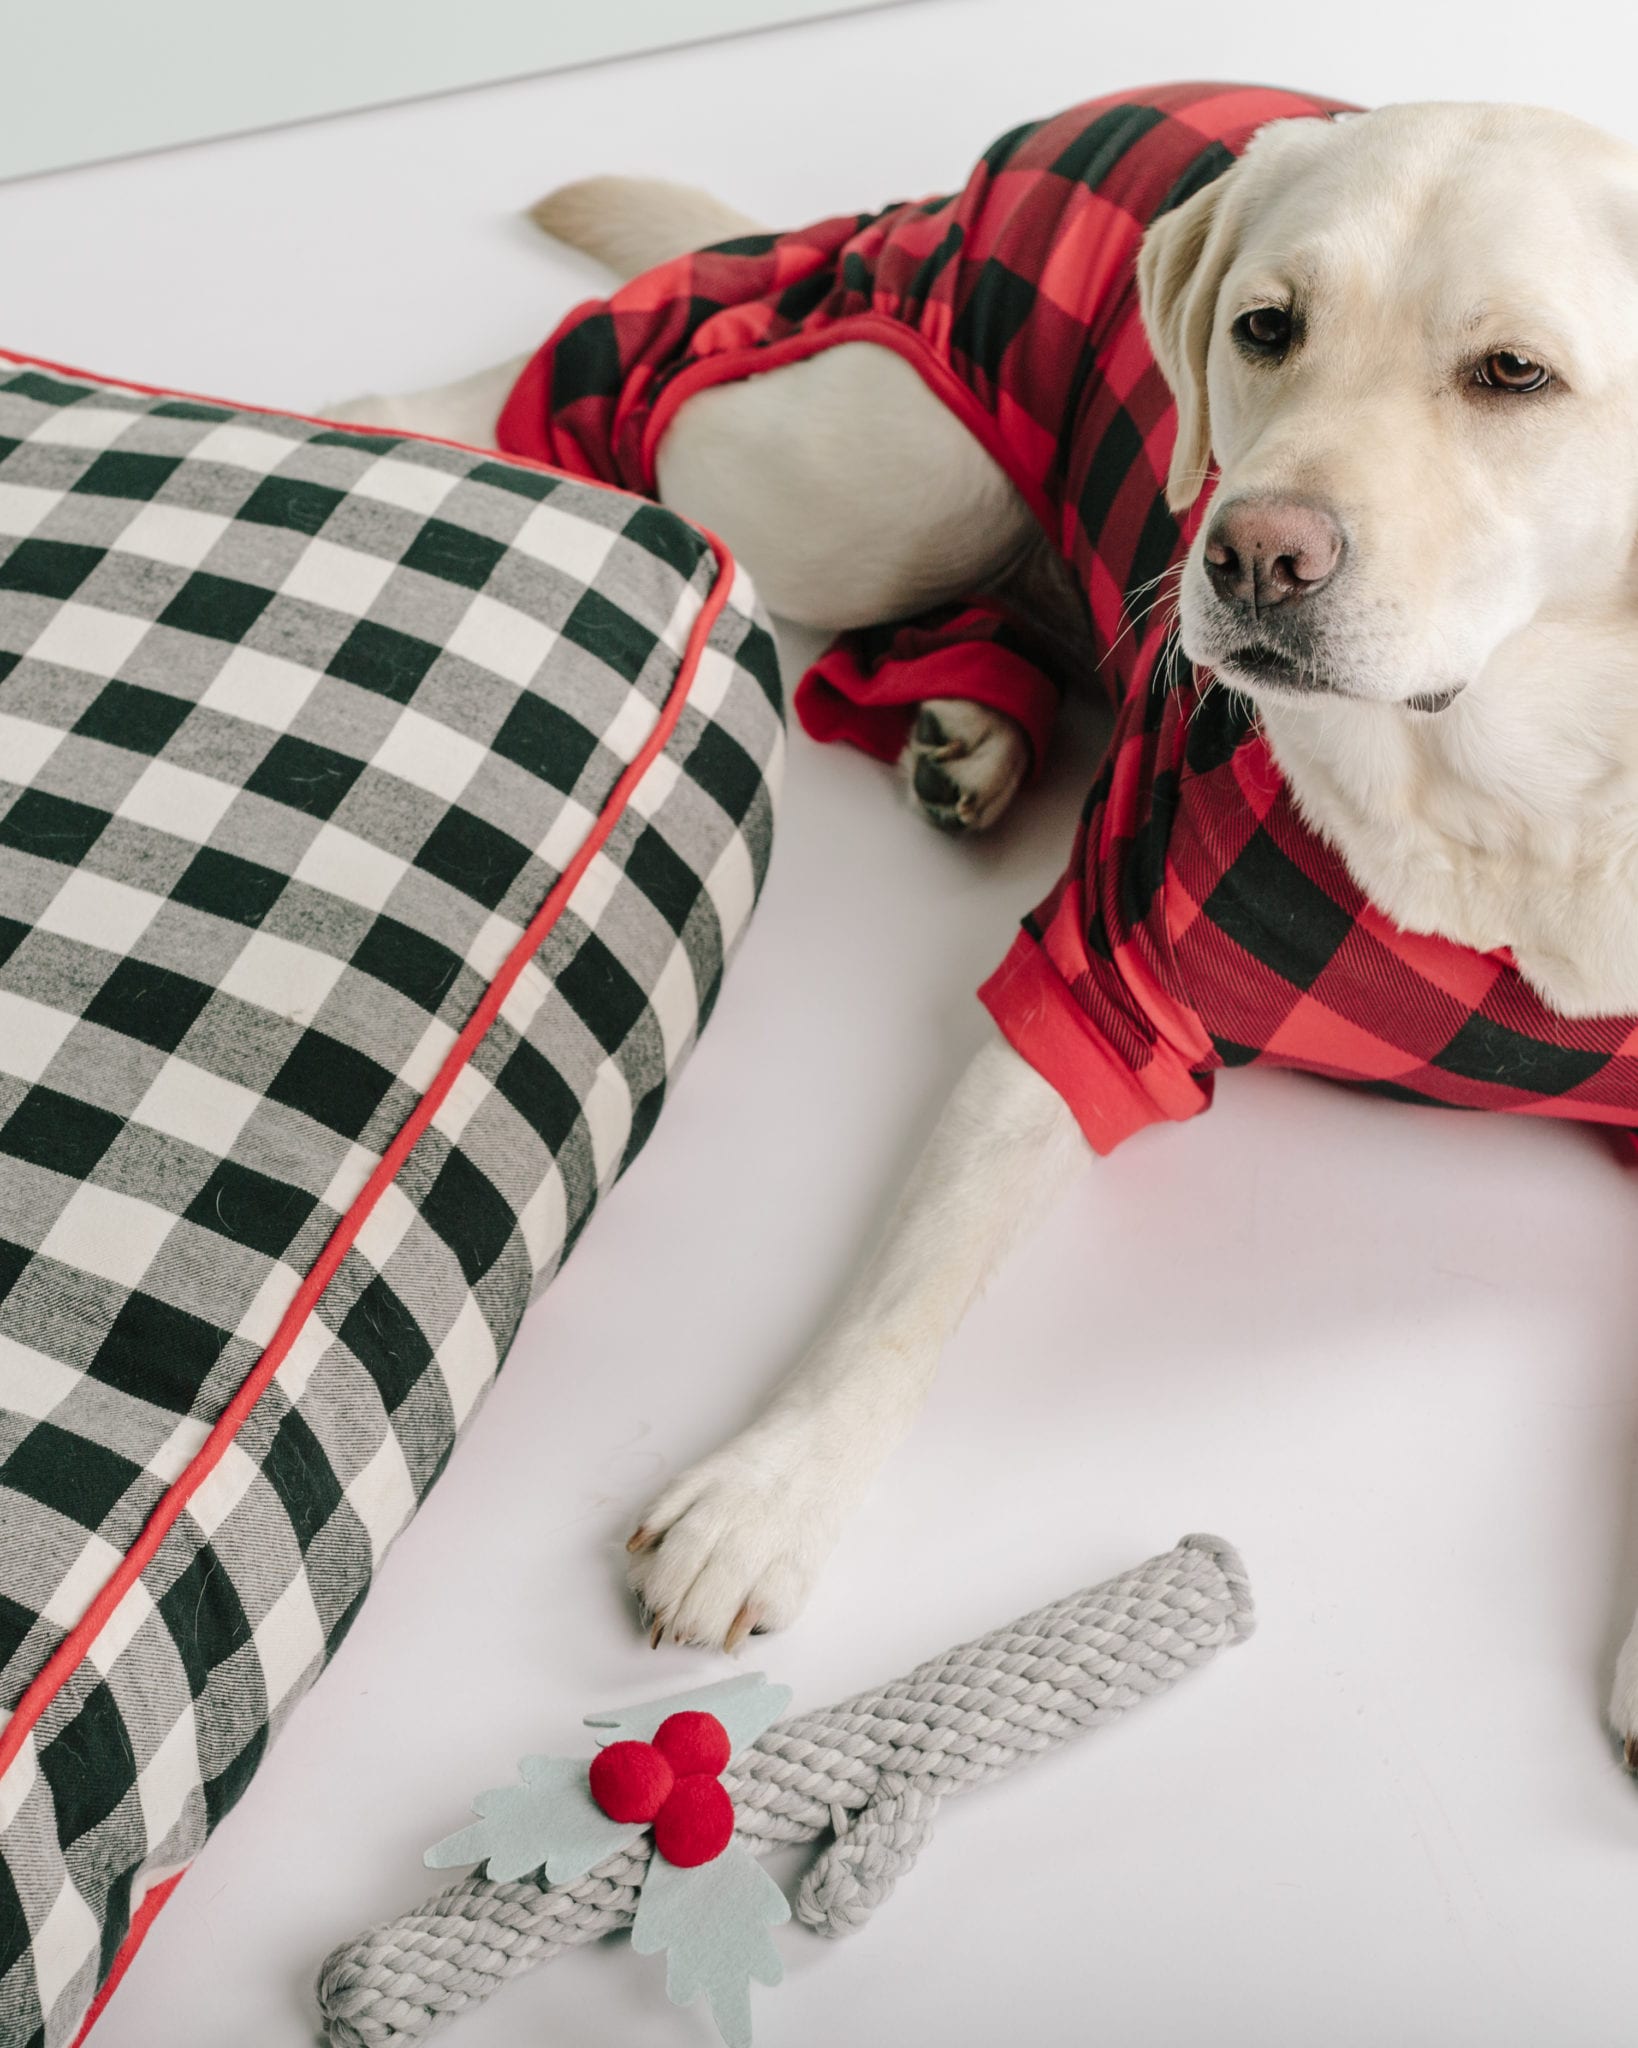 W&D Launches Limited-Time Travel and Pet Collection with Target! – Wit & Delight